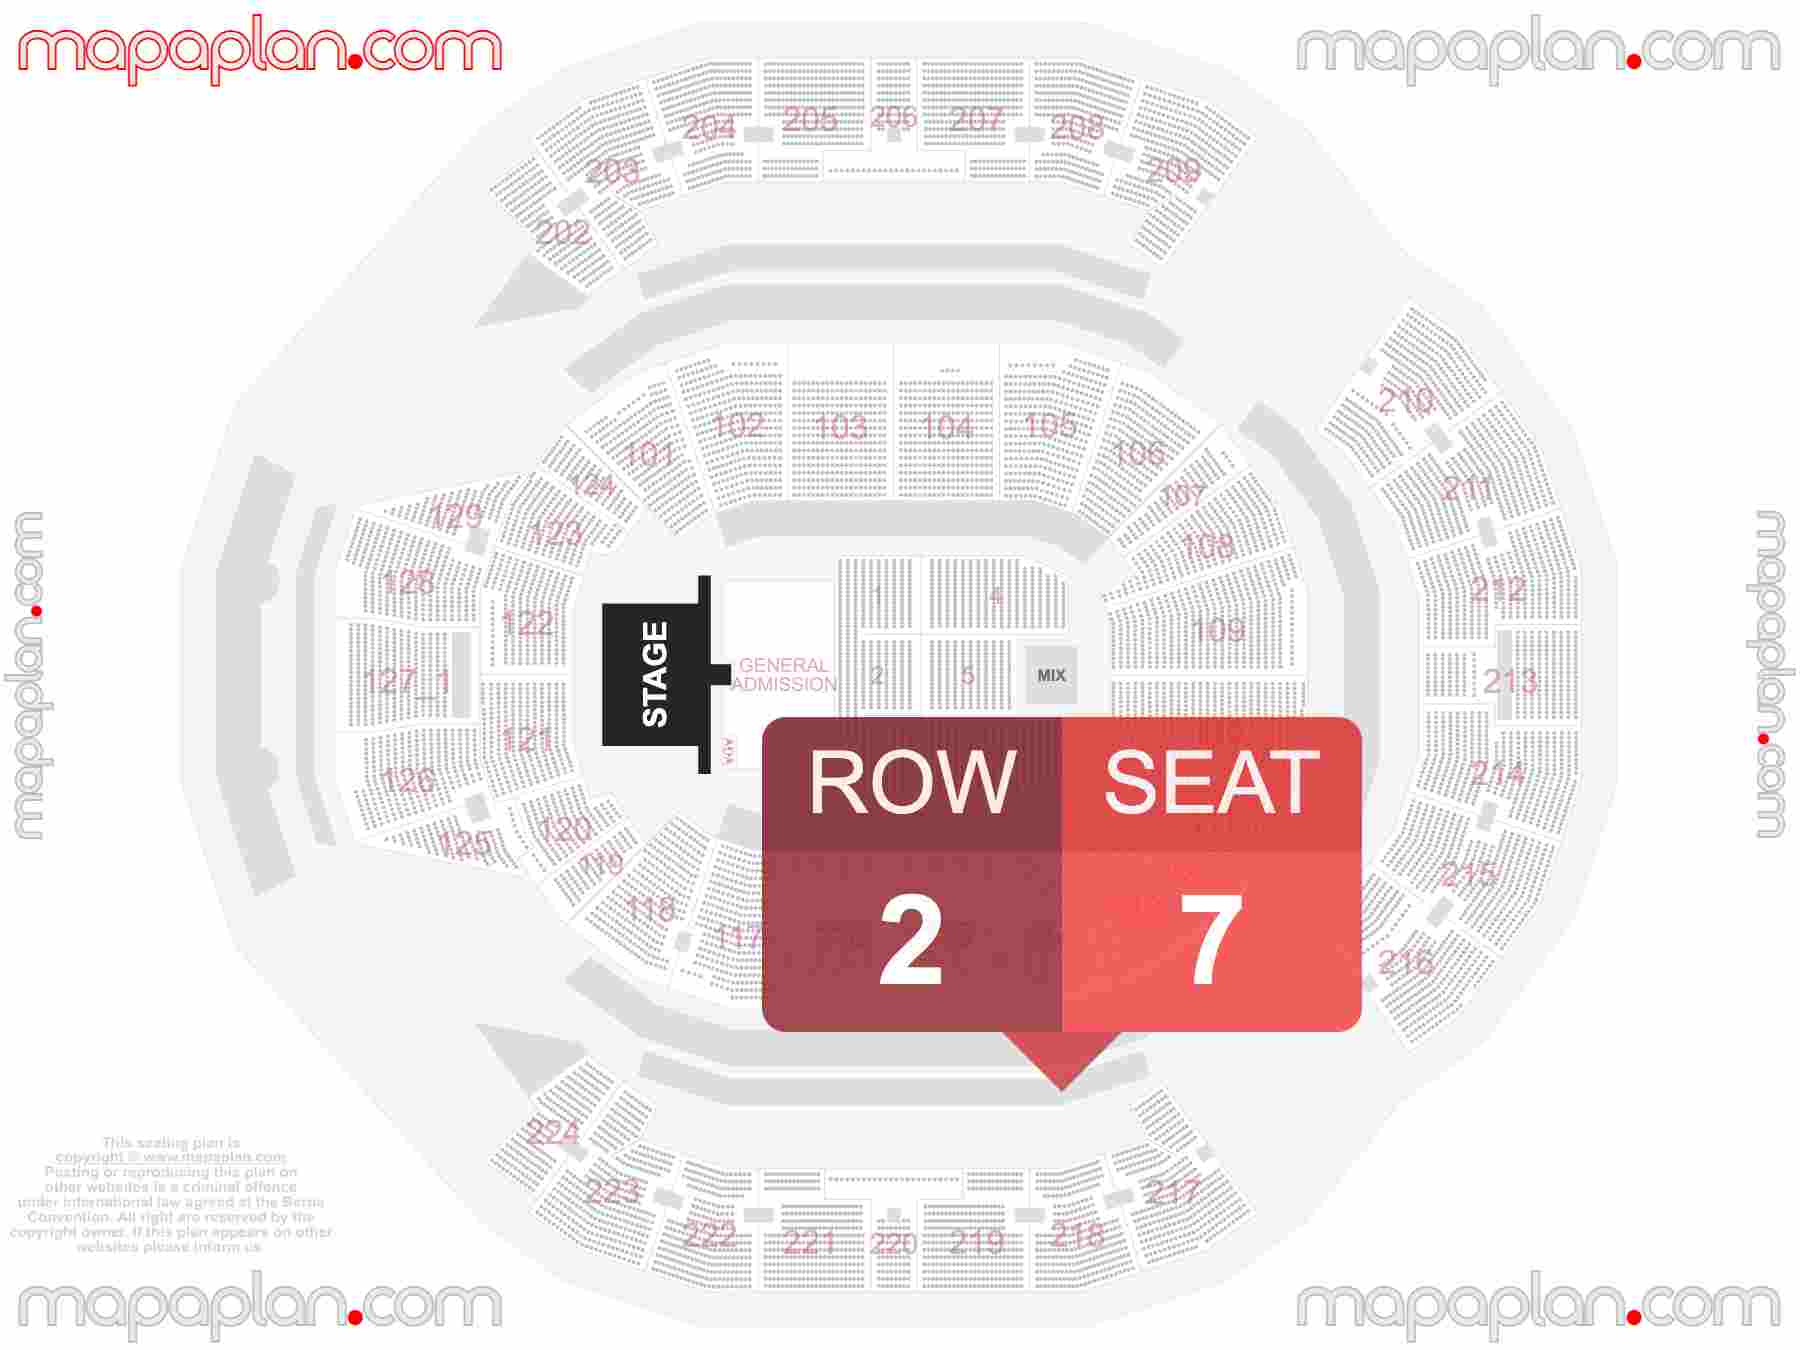 San Francisco Chase Center seating chart Concert inside capacity view arrangement plan - Interactive virtual 3d best seats & rows detailed stadium image configuration layout